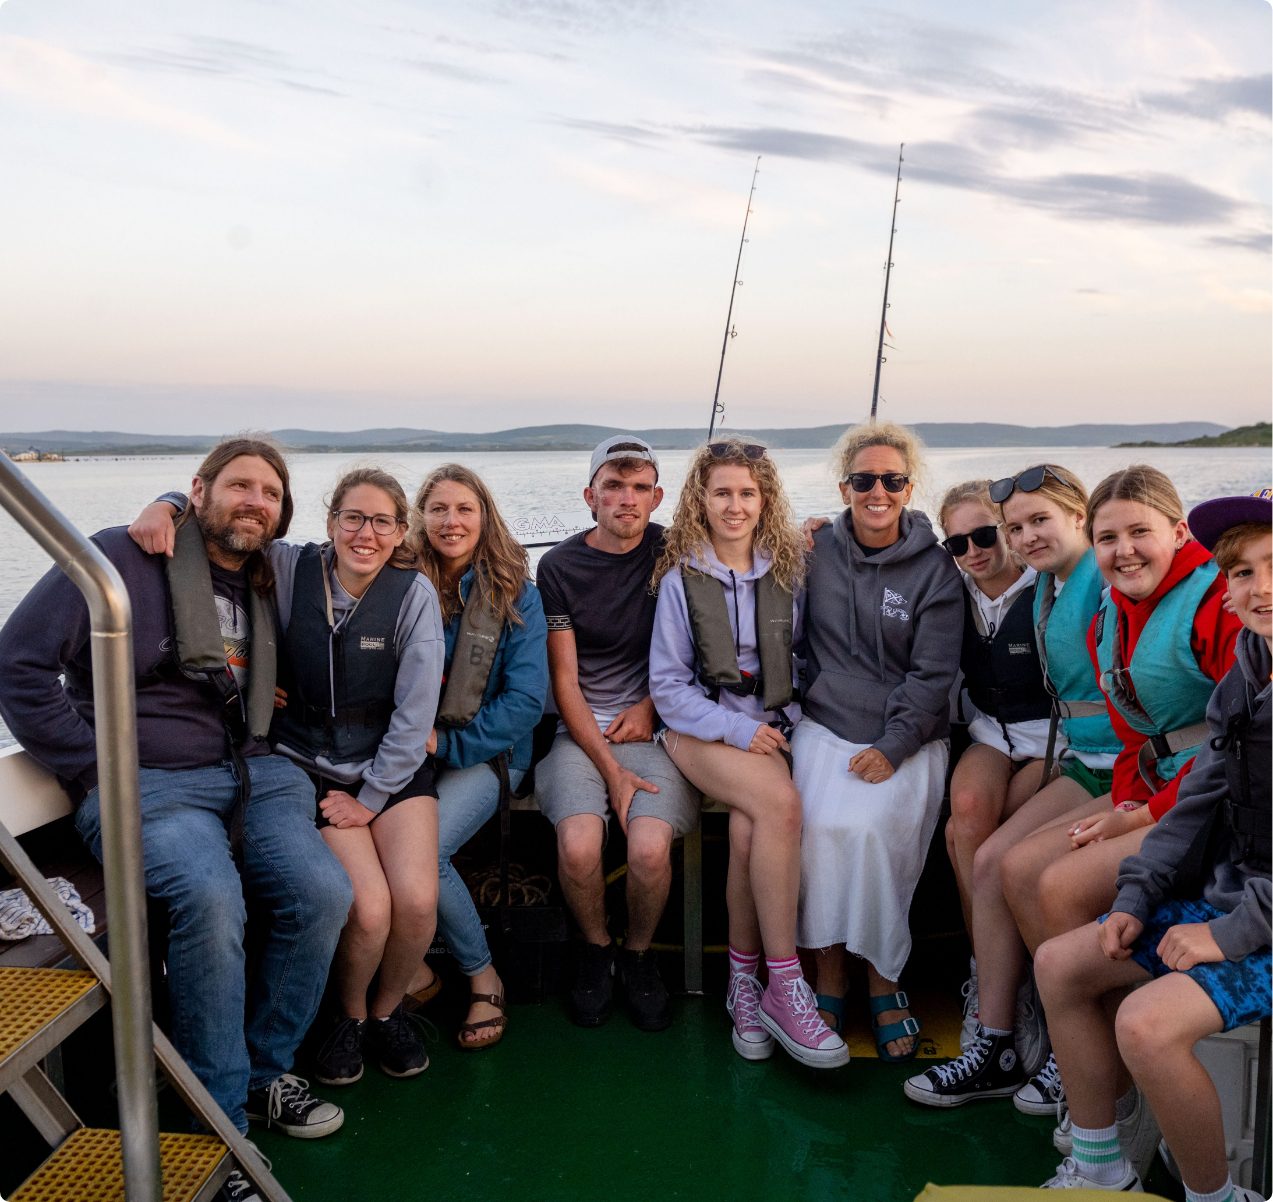 Boats tours in West Cork